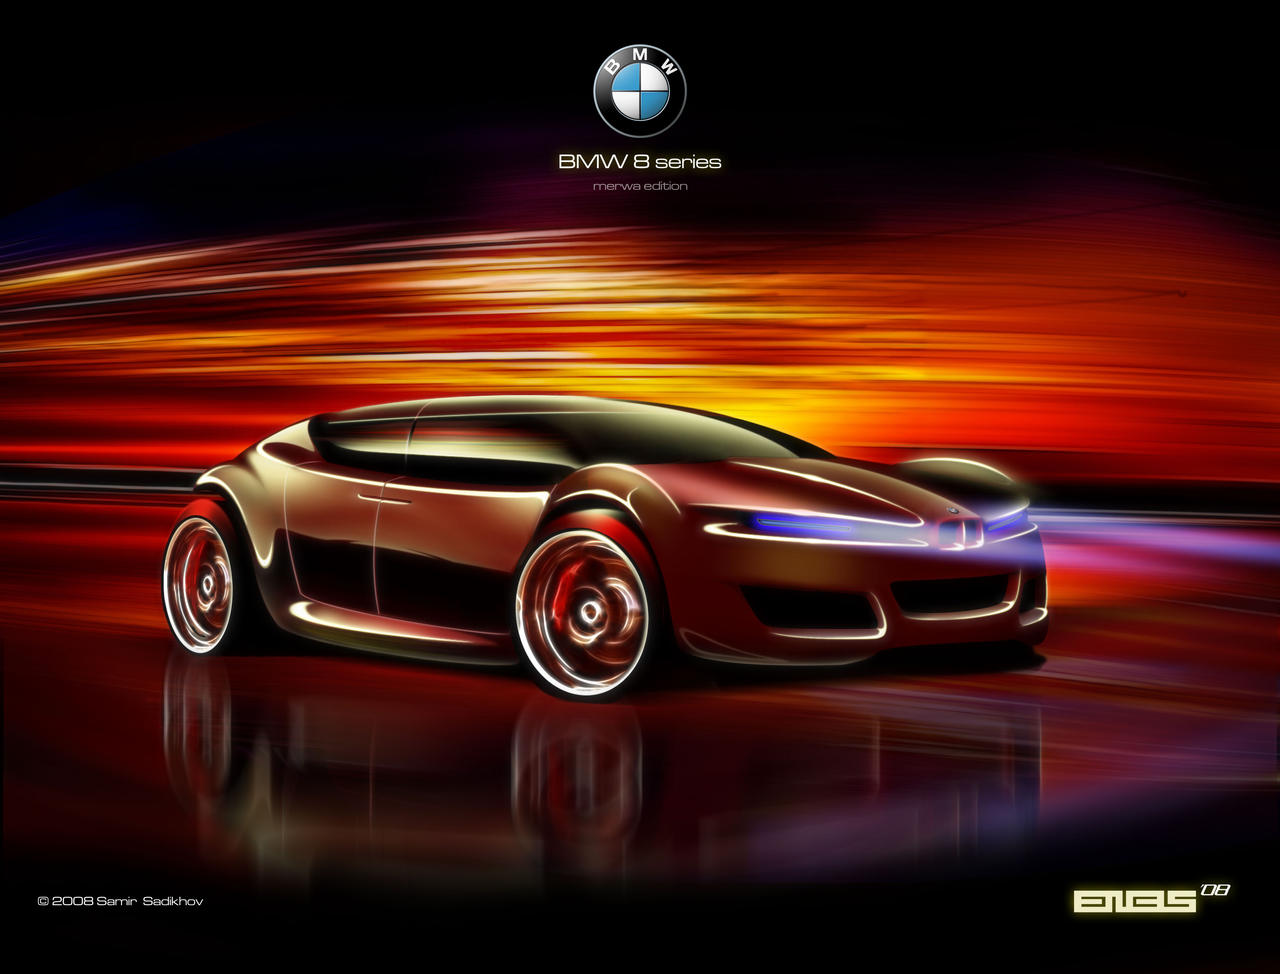   on Our Hopes Reviveed   New Design Of The Bmw 8 Series  It Combines The